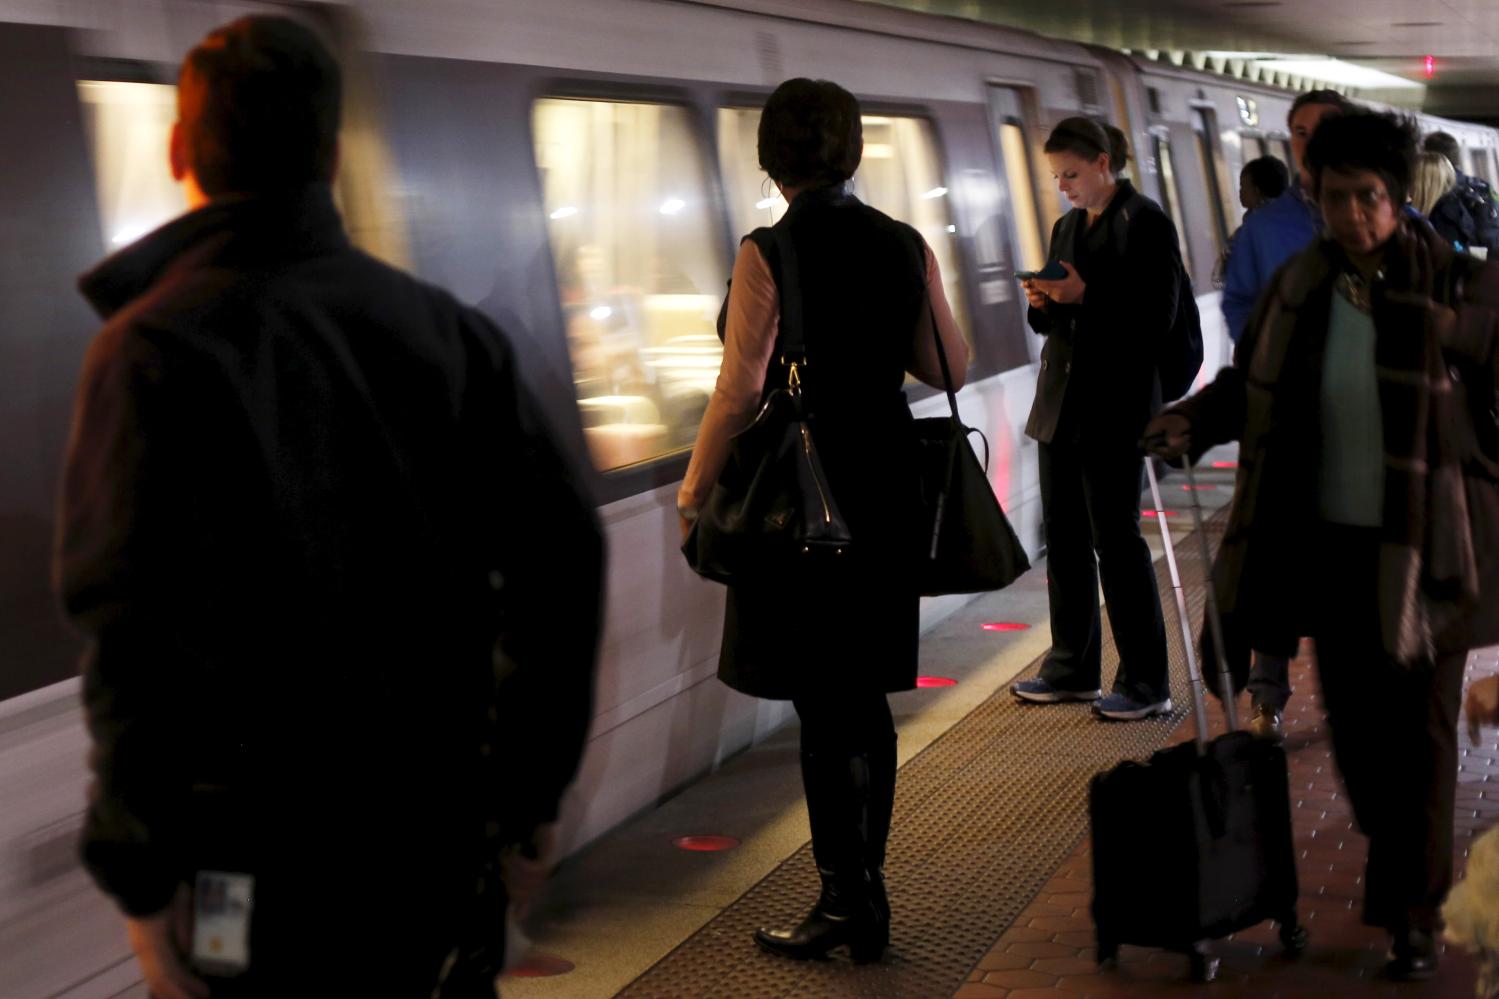 People ride the Metro subway system during the evening rush hour in Washington